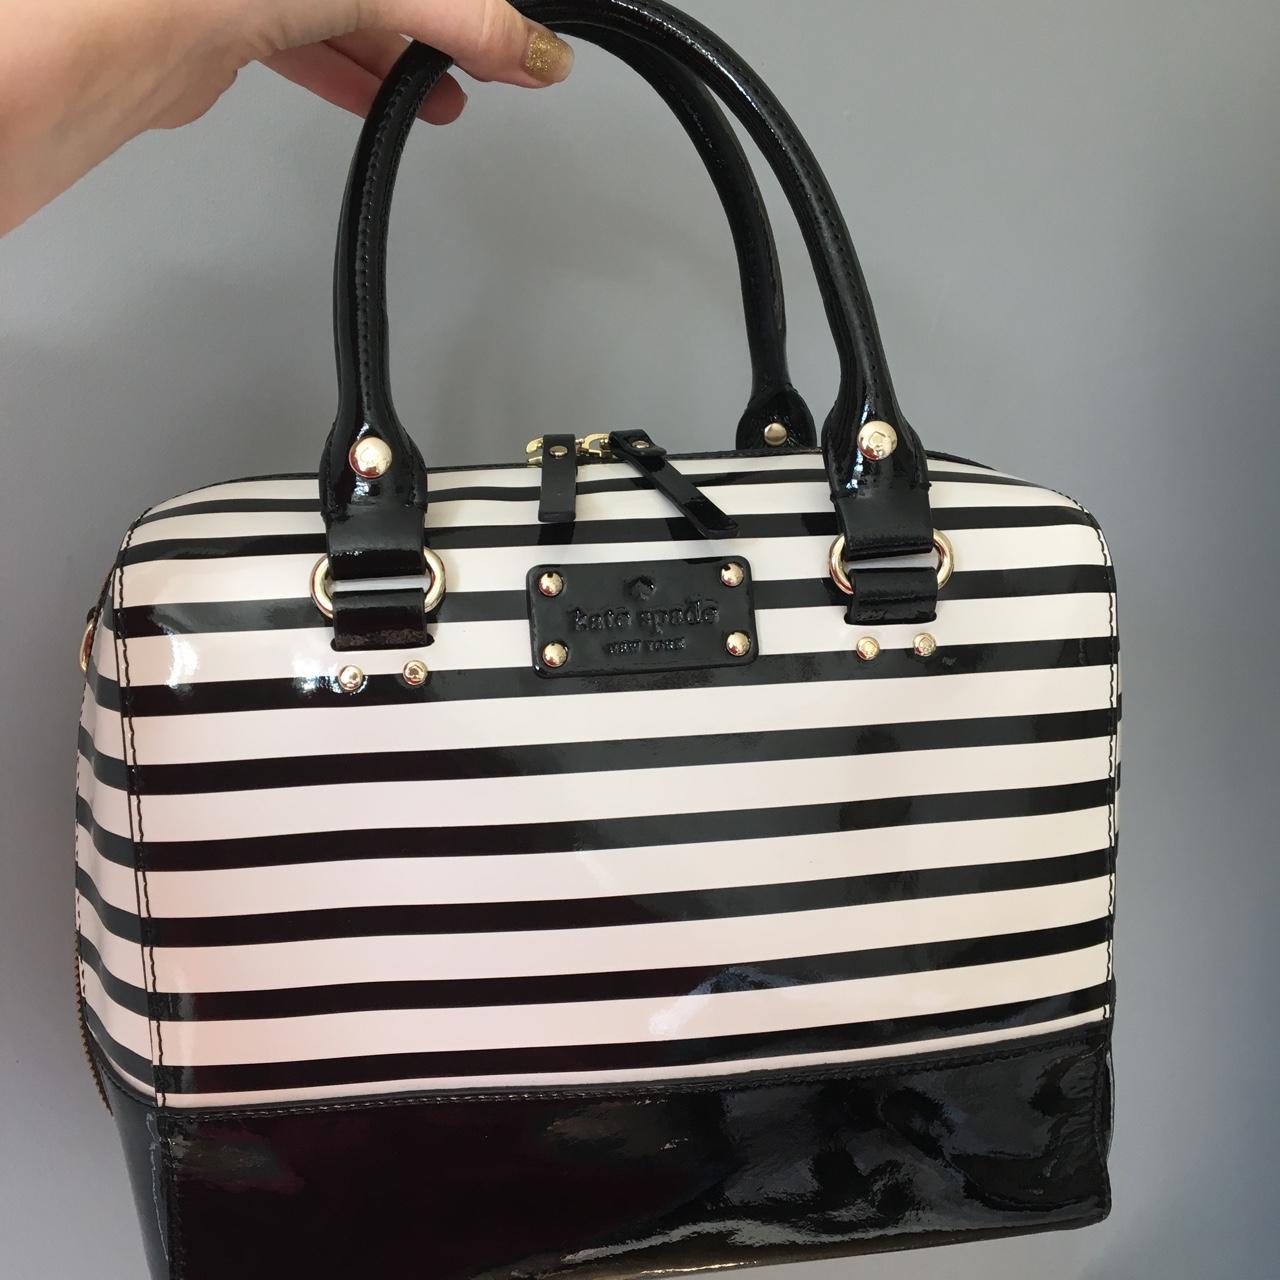 Black & White Stripe - Mix & Match Crossbody Strap - Thirty-One Gifts -  Affordable Purses, Totes & Bags